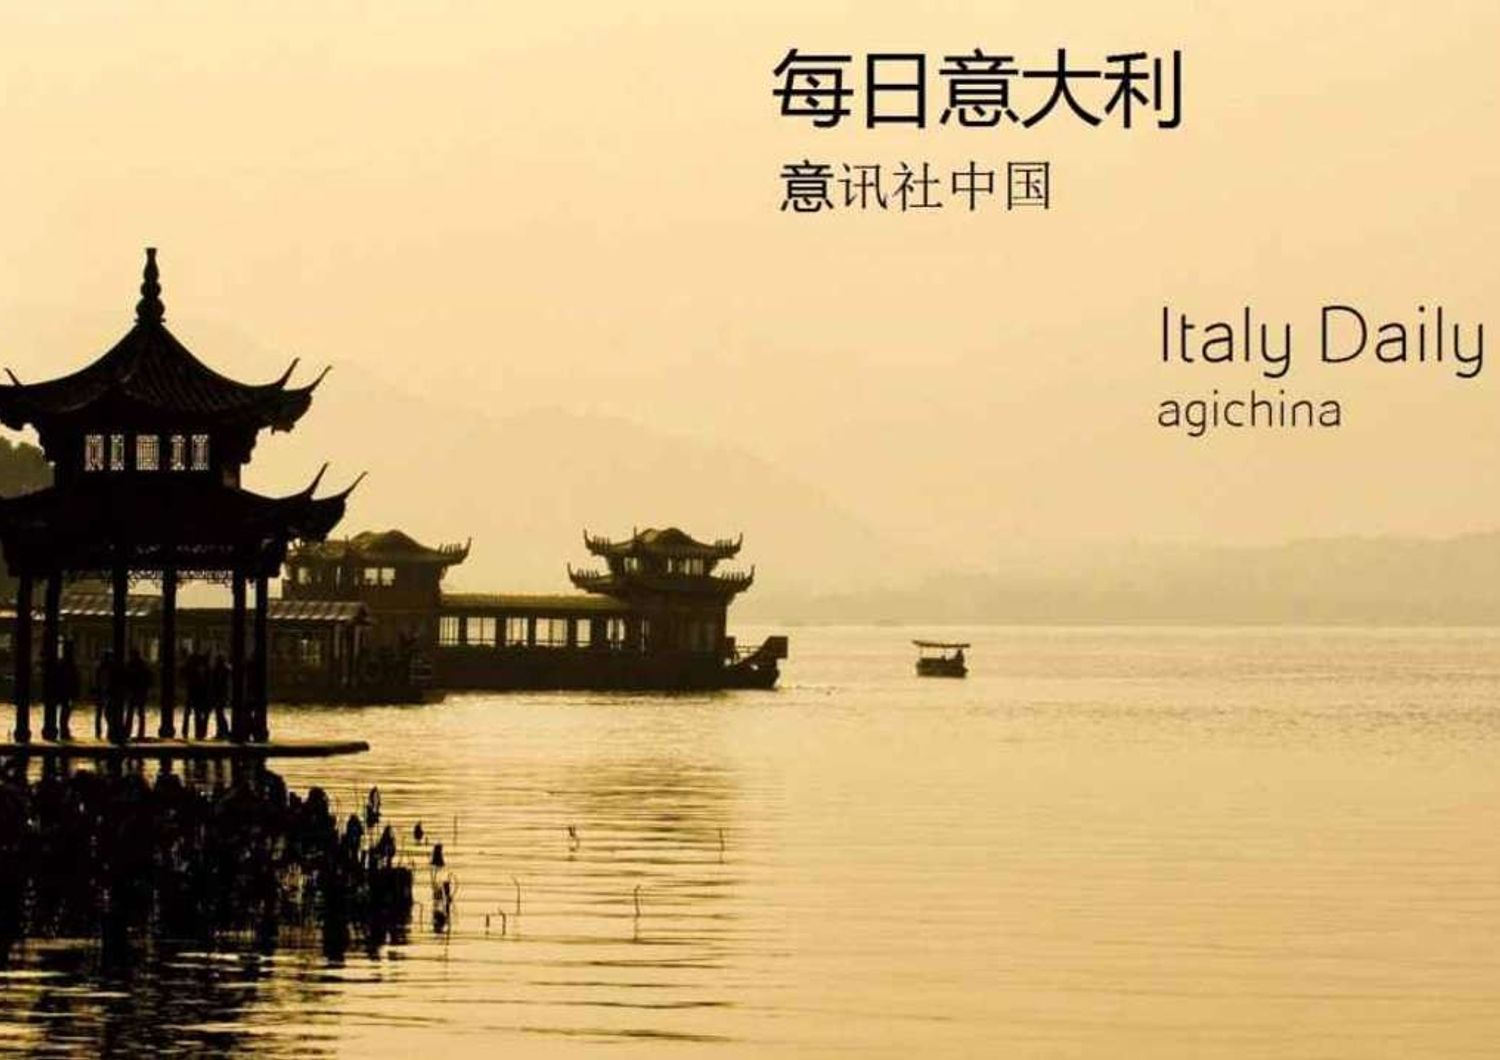 AGI launches Chinese-language Italy Daily